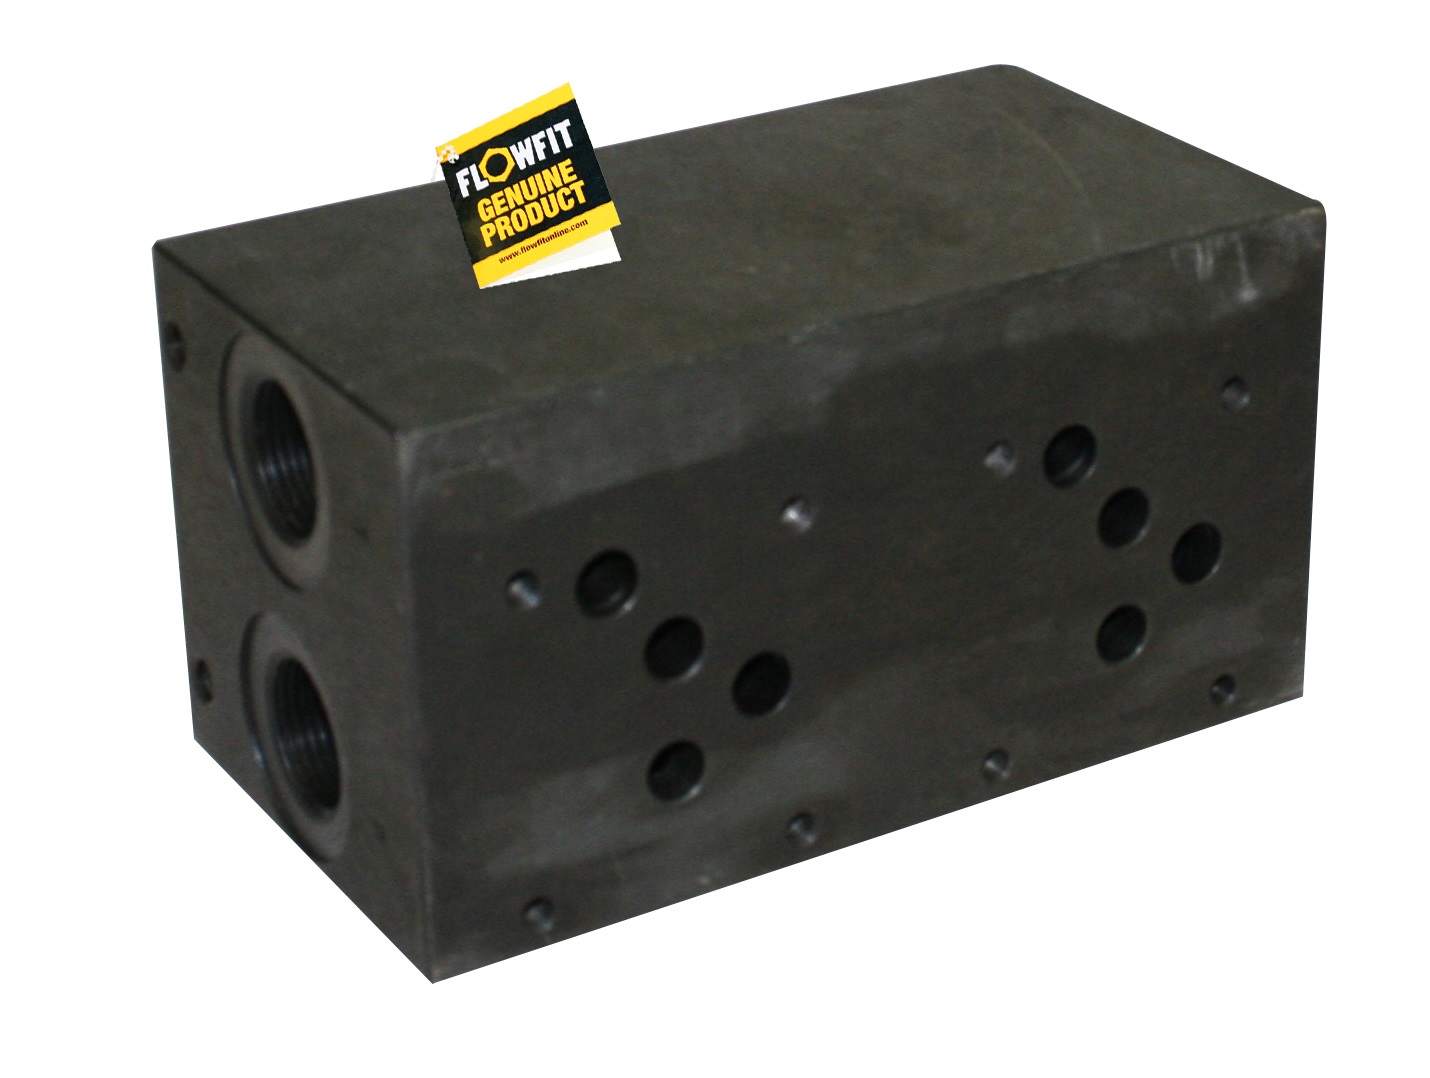 Flowfit hydraulic cetop 5 1 station steel manifold without relief valve cavity